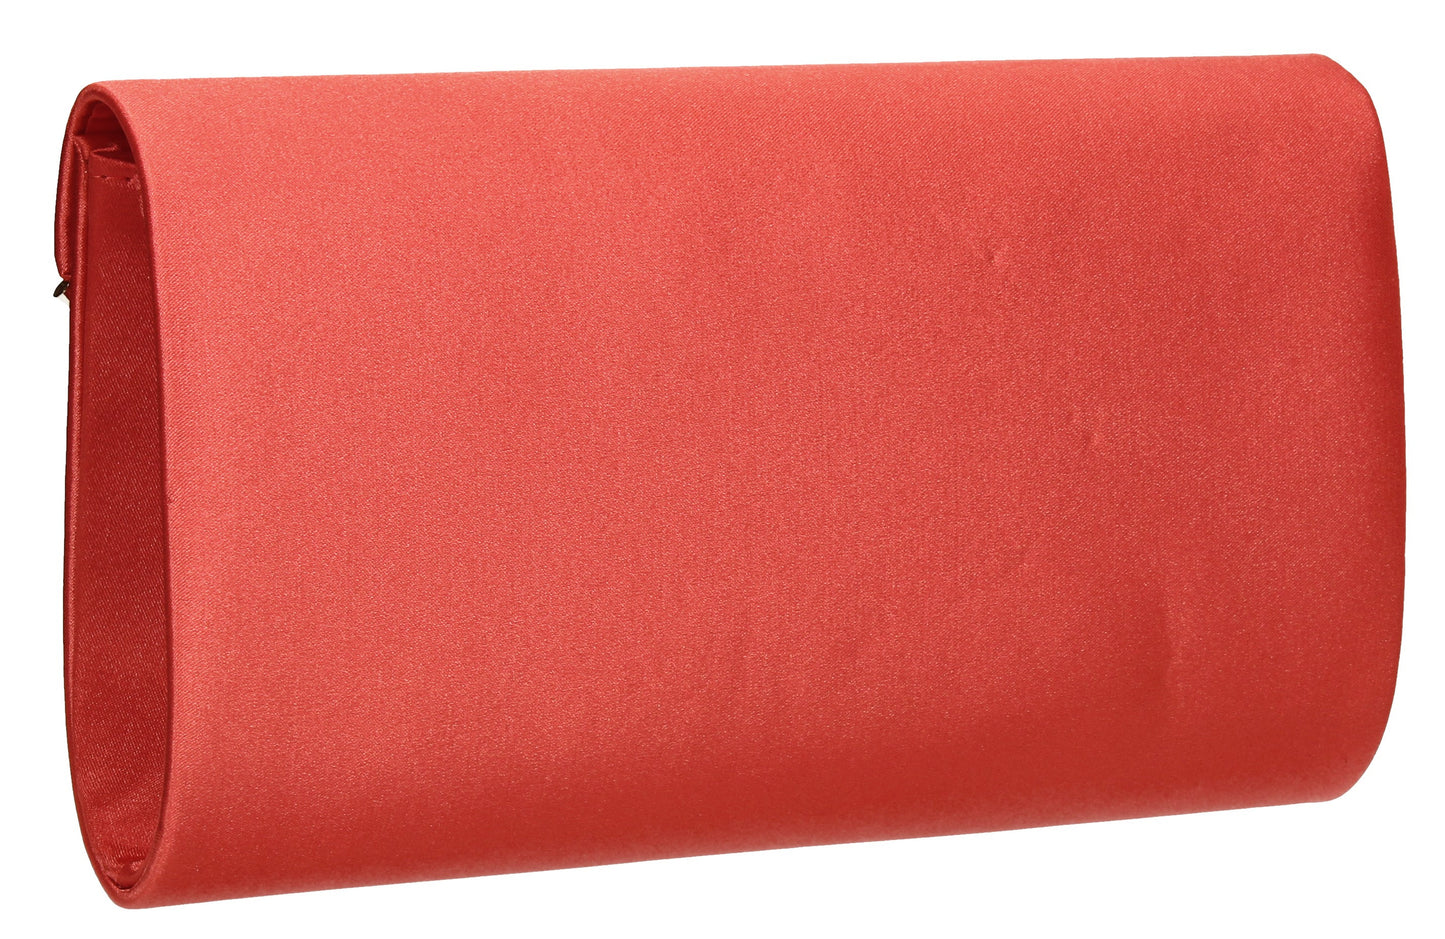 SWANKYSWANS Olivia Clutch Bag Coral Red Cute Cheap Clutch Bag For Weddings School and Work